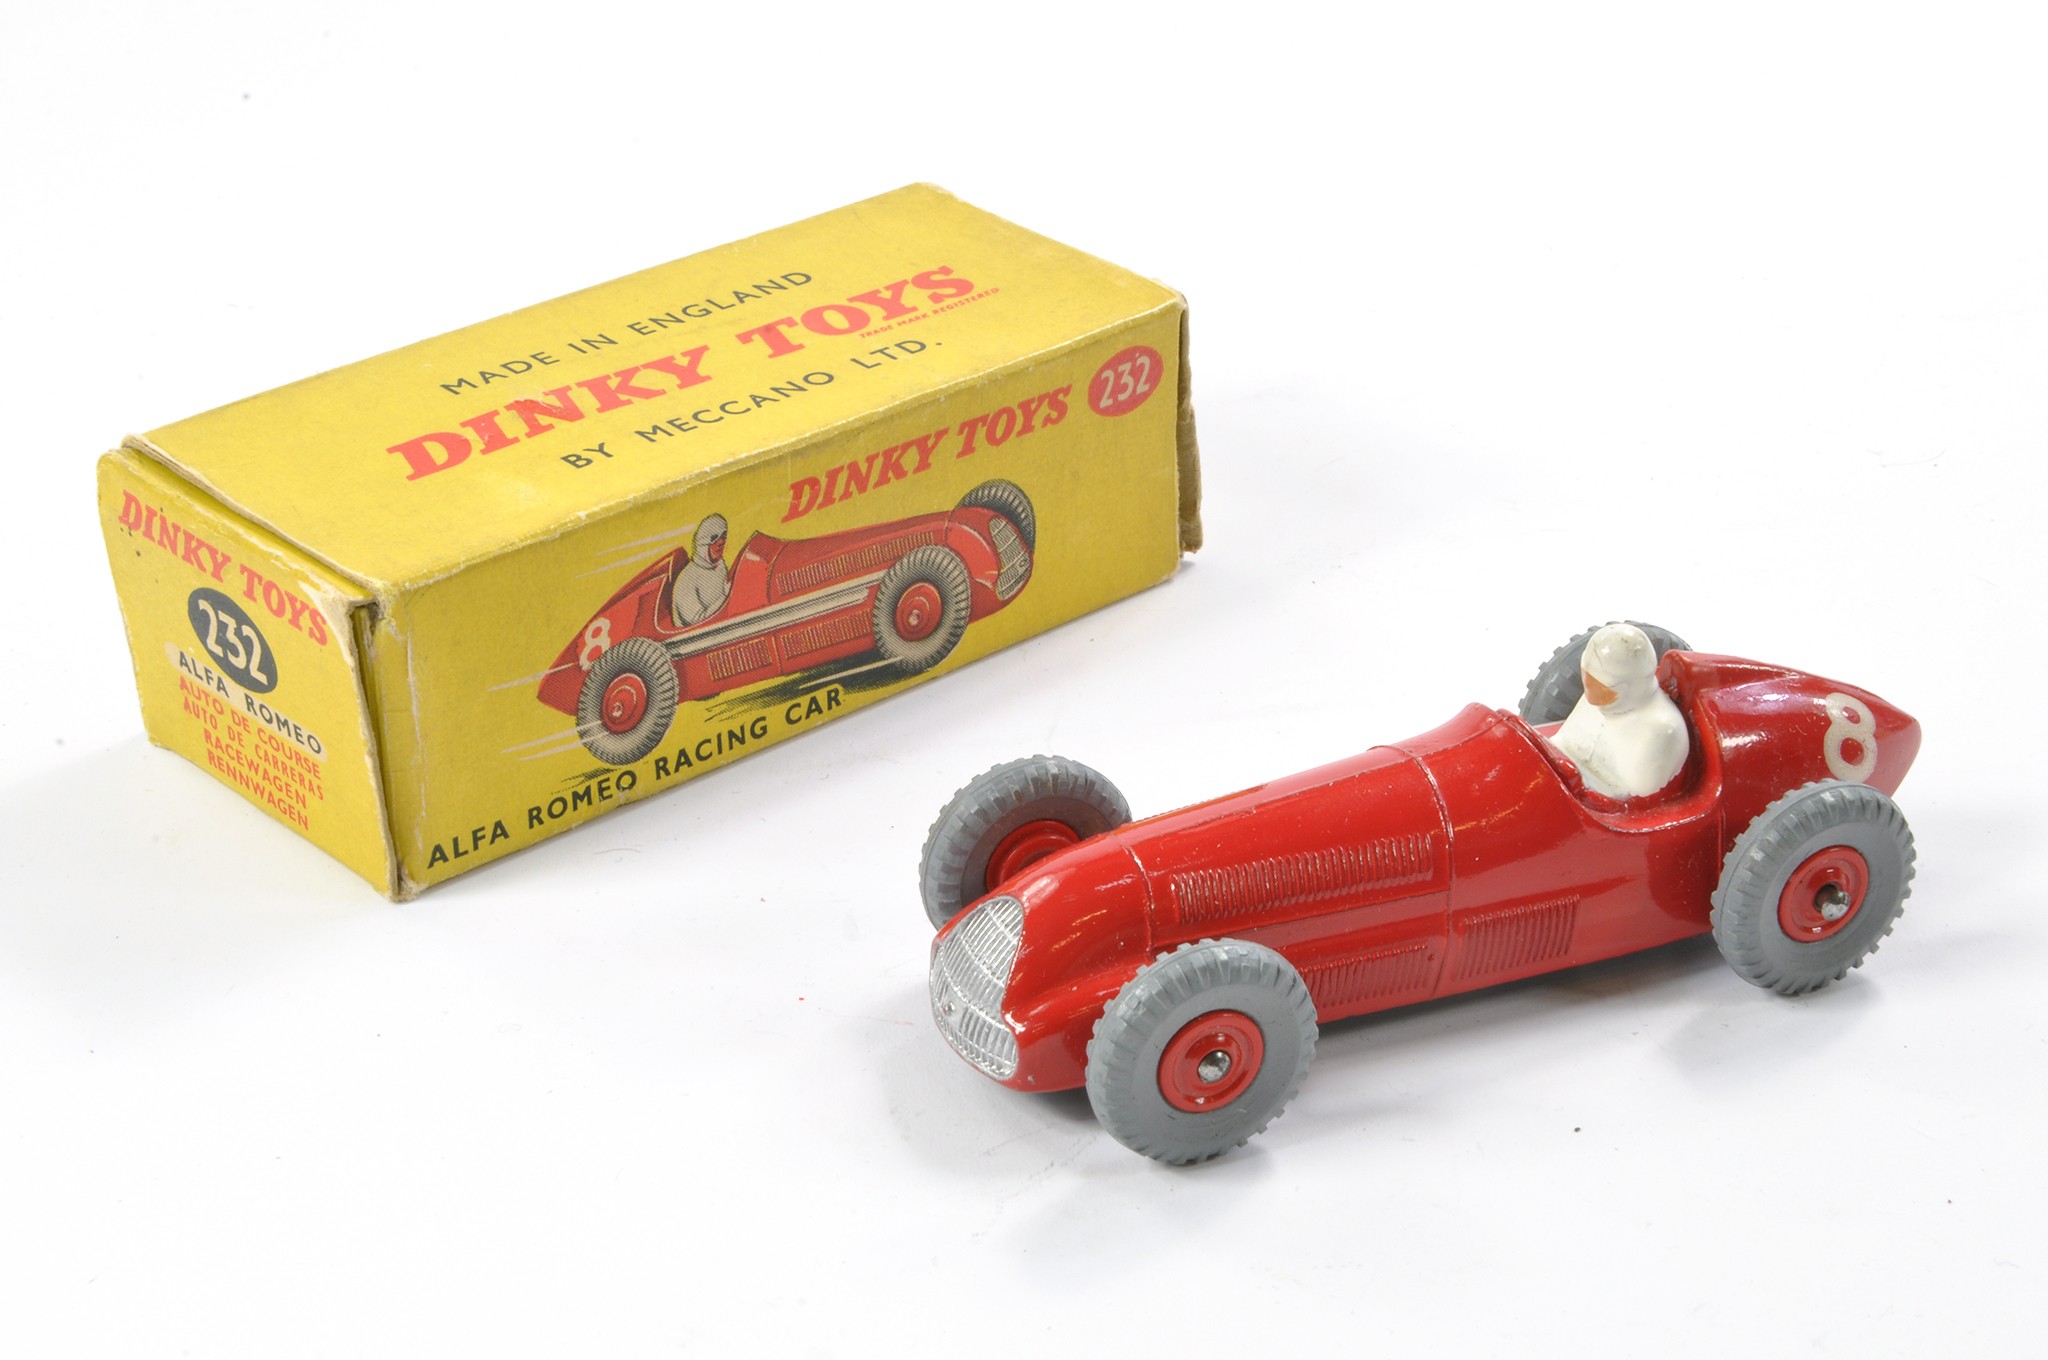 Dinky No. 232 Alfa Romeo Racing Car. Red including hubs. Generally excellent, no obvious sign of